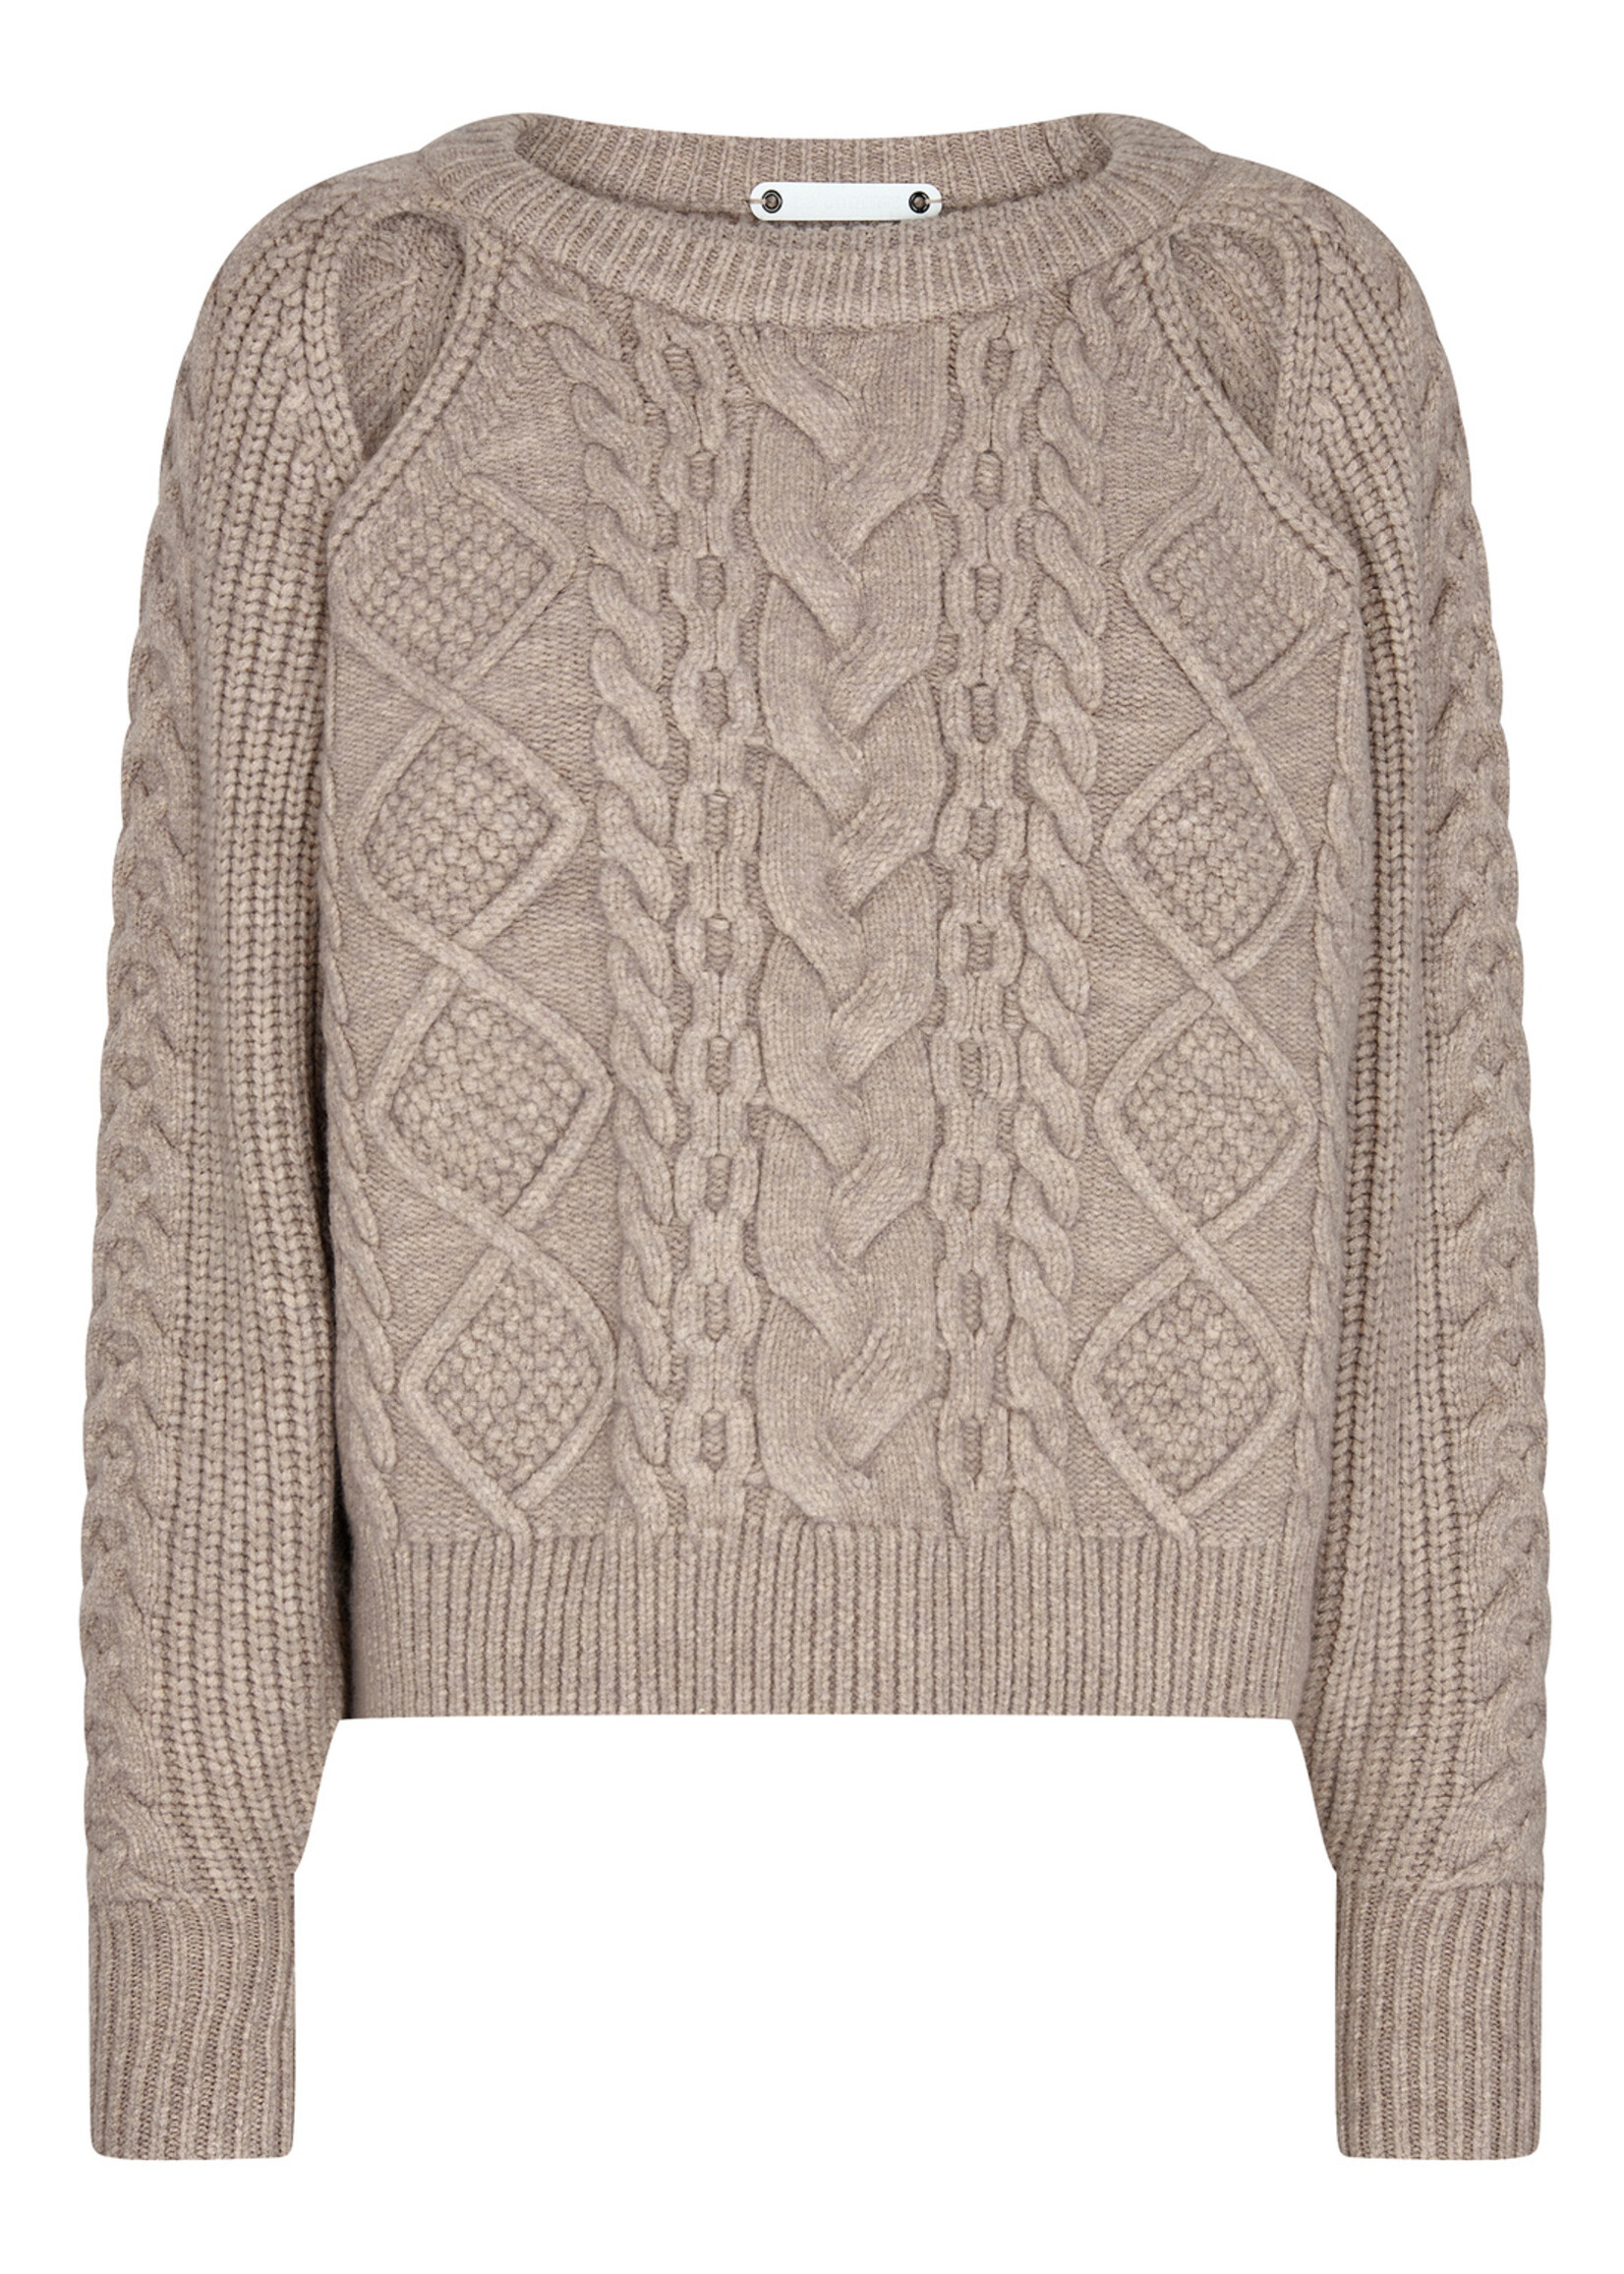 Co'couture New Row Cable Knit - Champagne